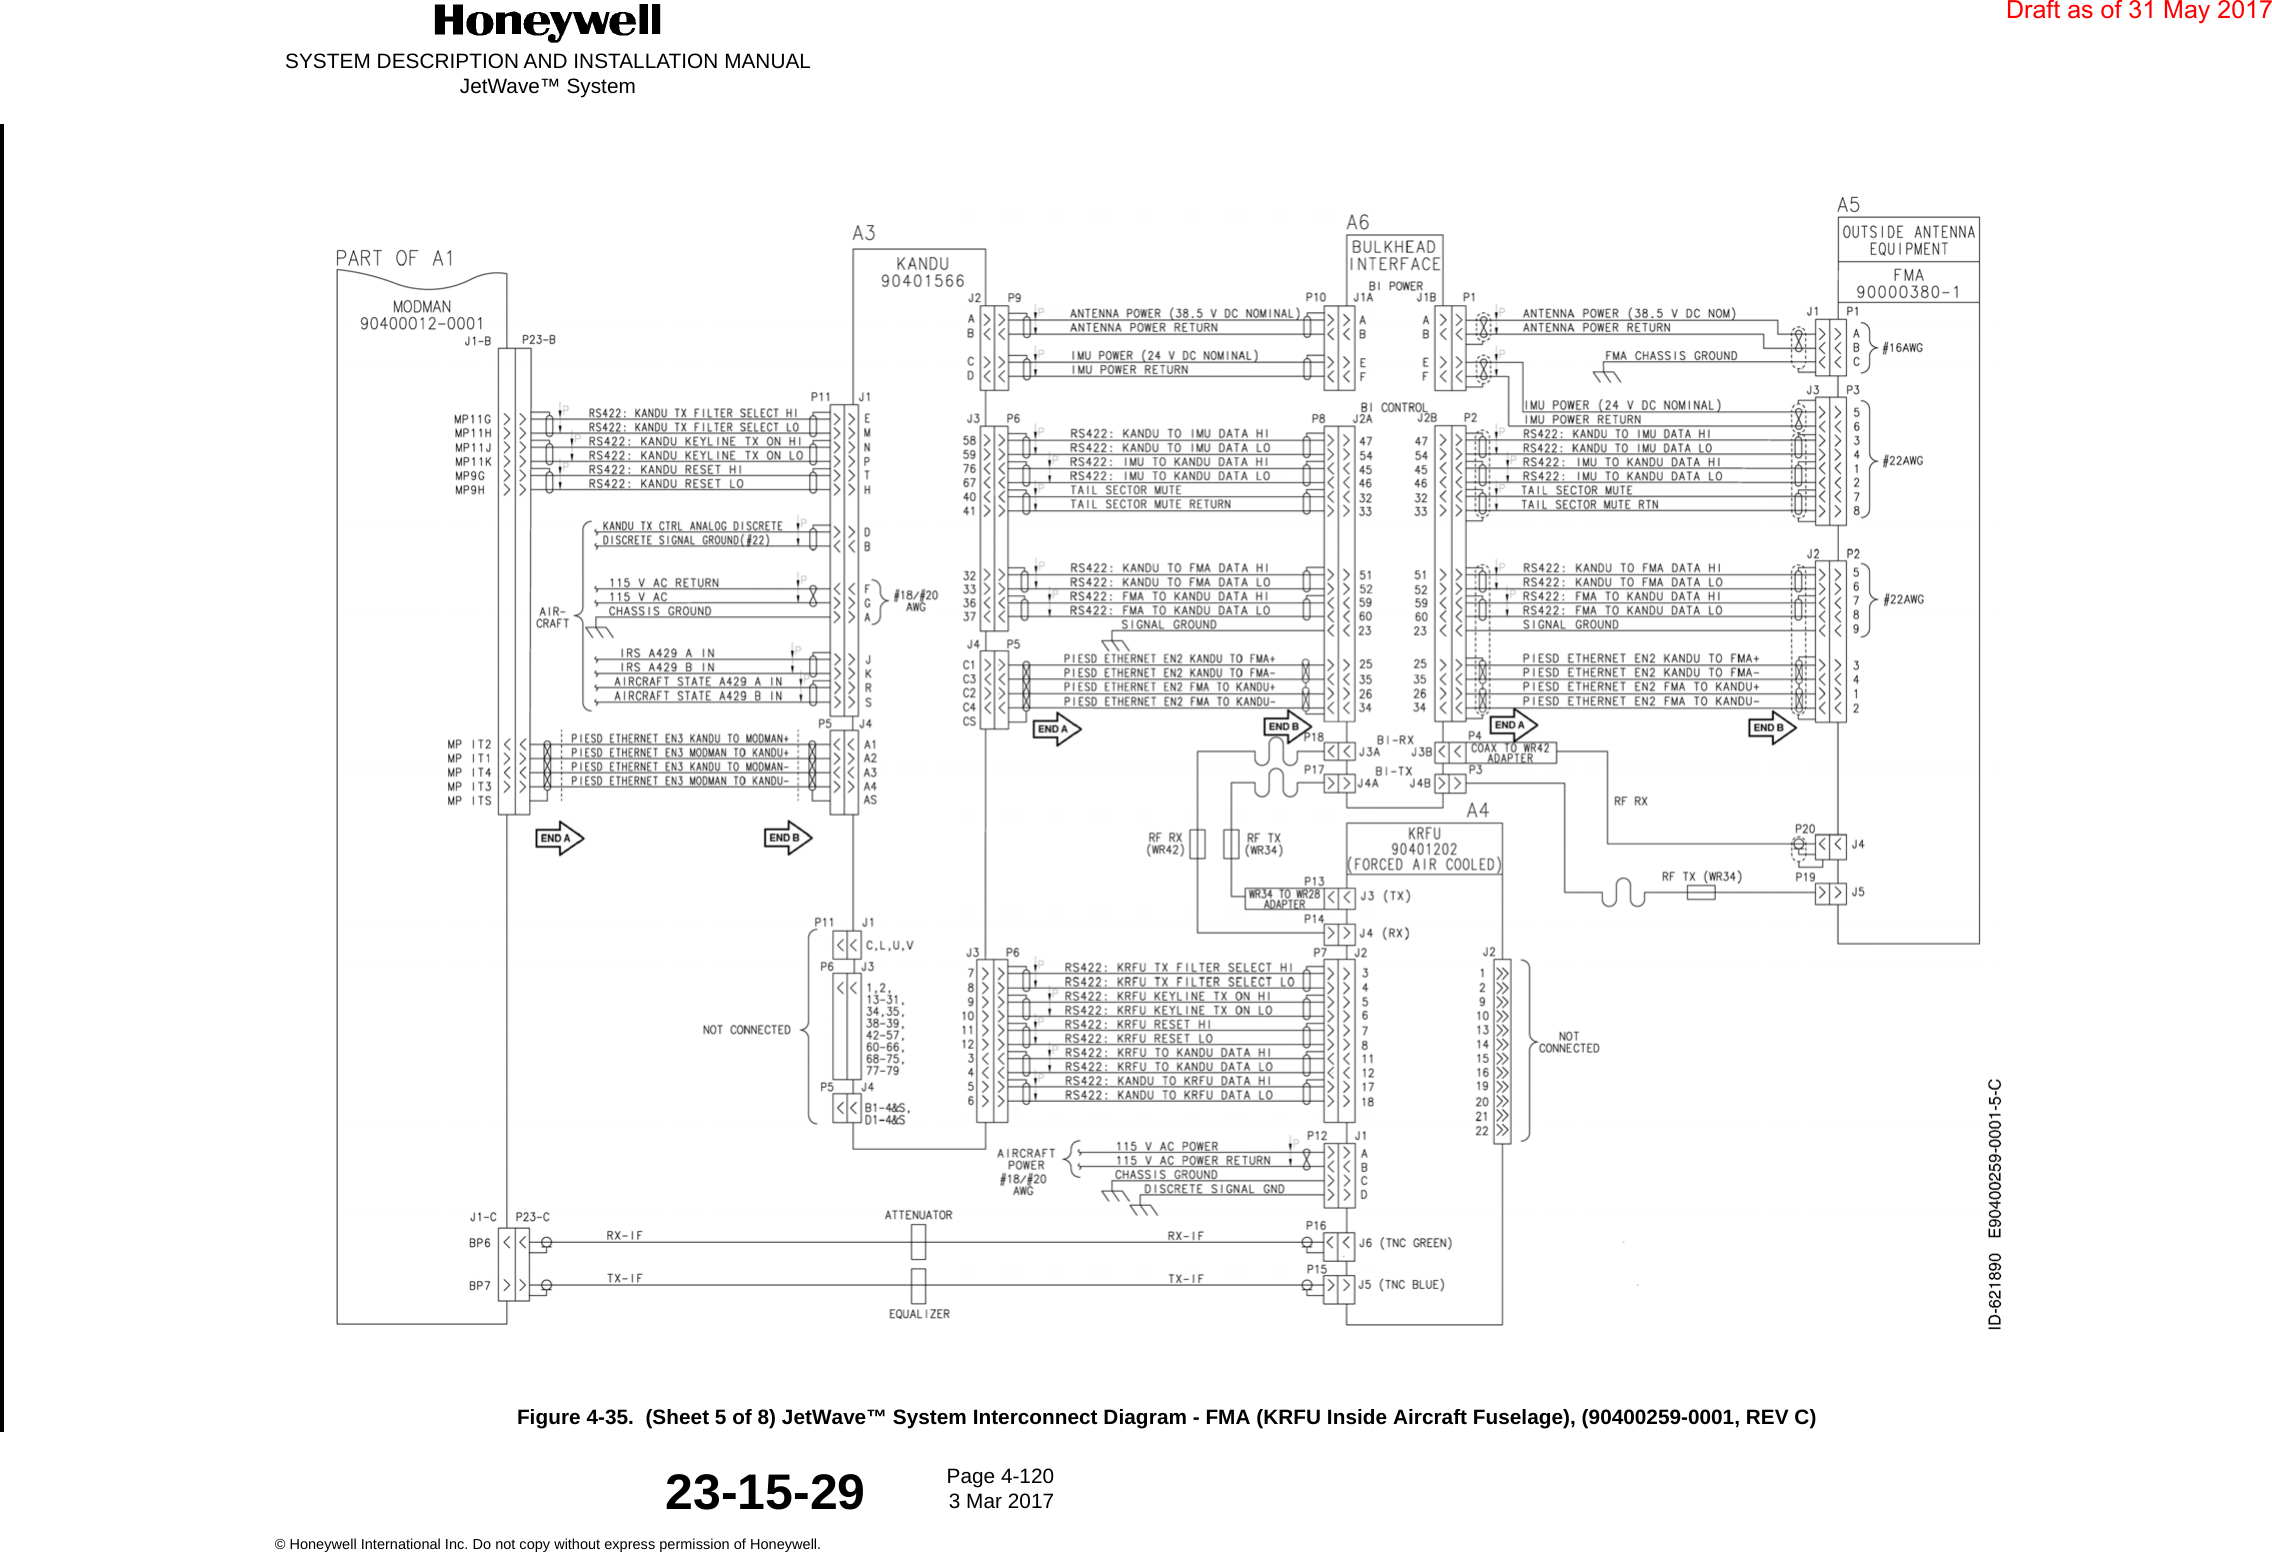 SYSTEM DESCRIPTION AND INSTALLATION MANUALJetWave™ SystemPage 4-120 3 Mar 2017© Honeywell International Inc. Do not copy without express permission of Honeywell.23-15-29Figure 4-35.  (Sheet 5 of 8) JetWave™ System Interconnect Diagram - FMA (KRFU Inside Aircraft Fuselage), (90400259-0001, REV C)Draft as of 31 May 2017